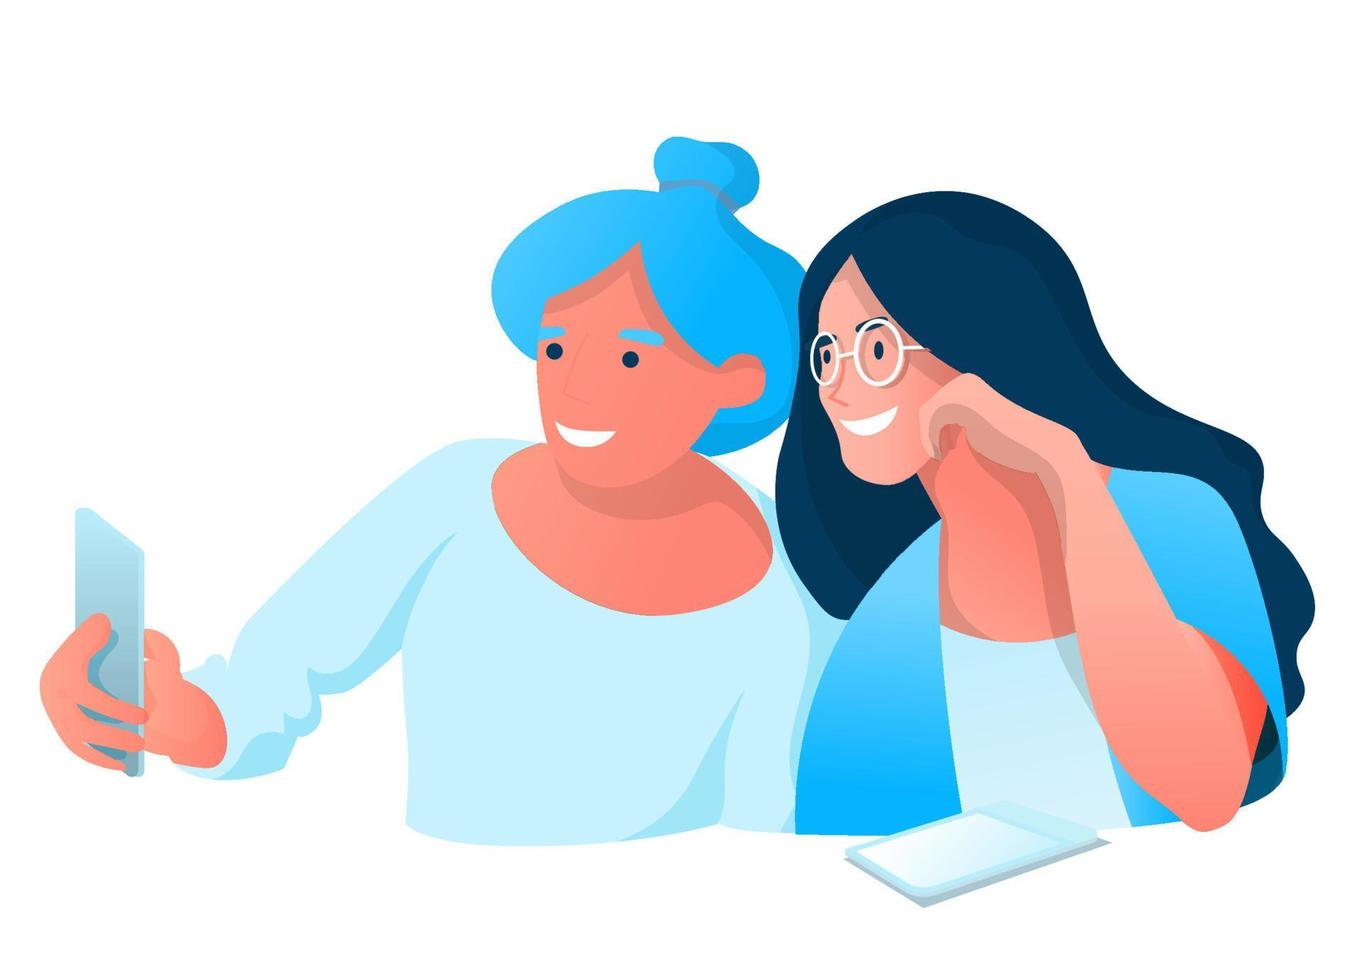 Happy smiling young women friends taking selfie photo vector illustration. Friend girls taking selfie photographing.